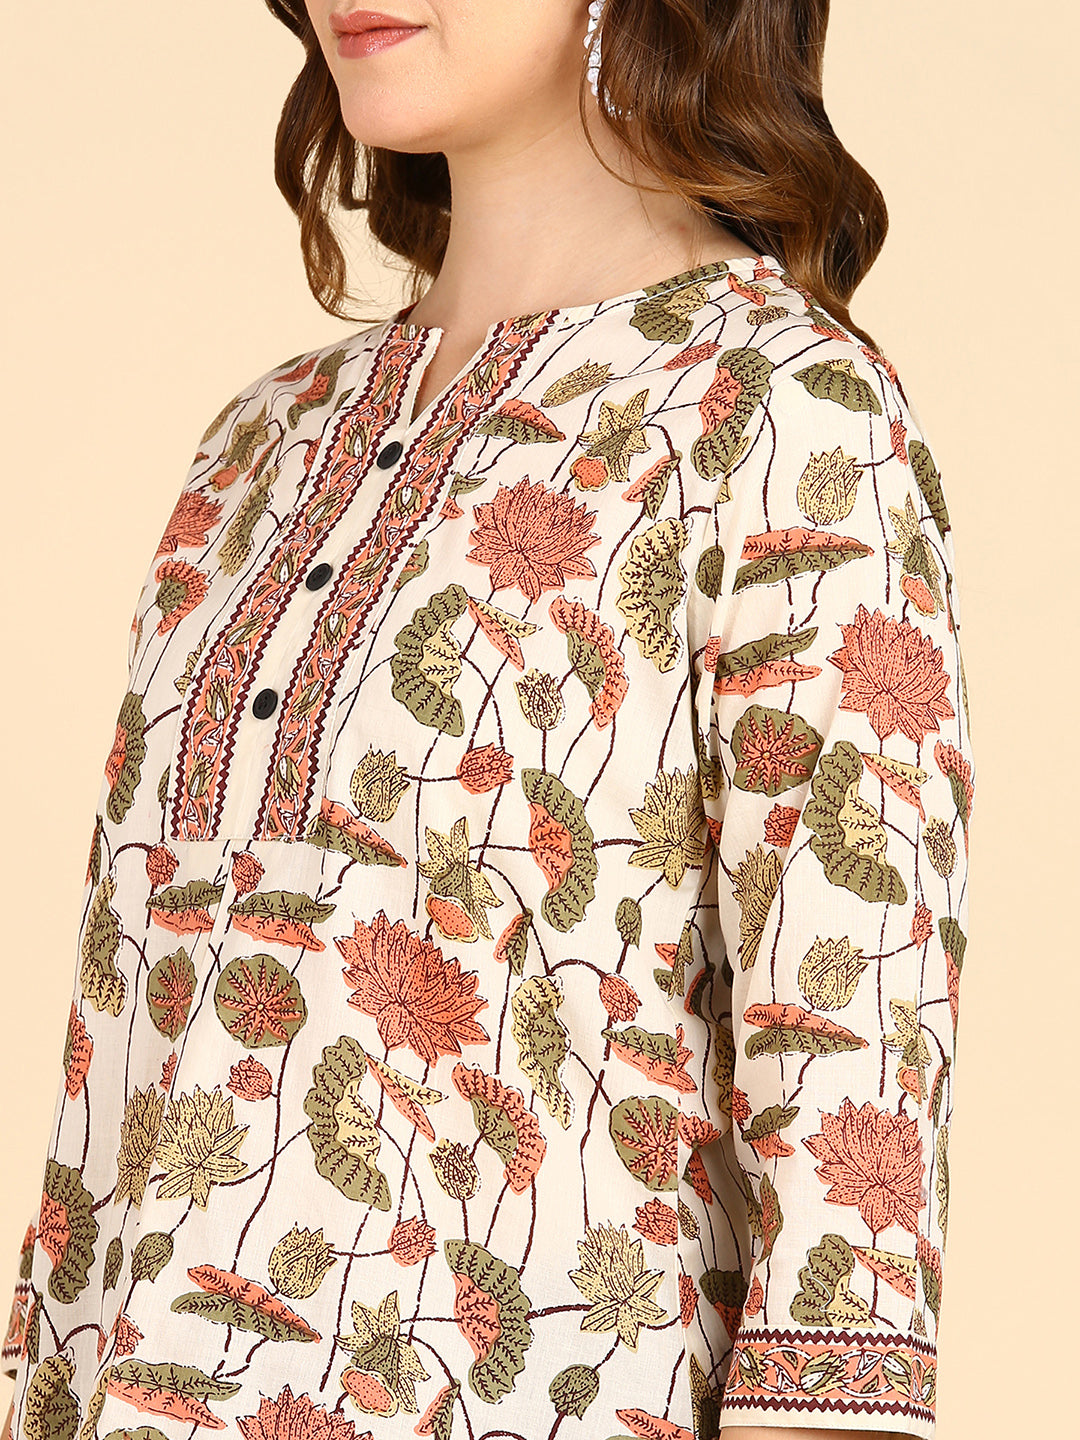 Floral Printed Cream Top With Front Border Deatails